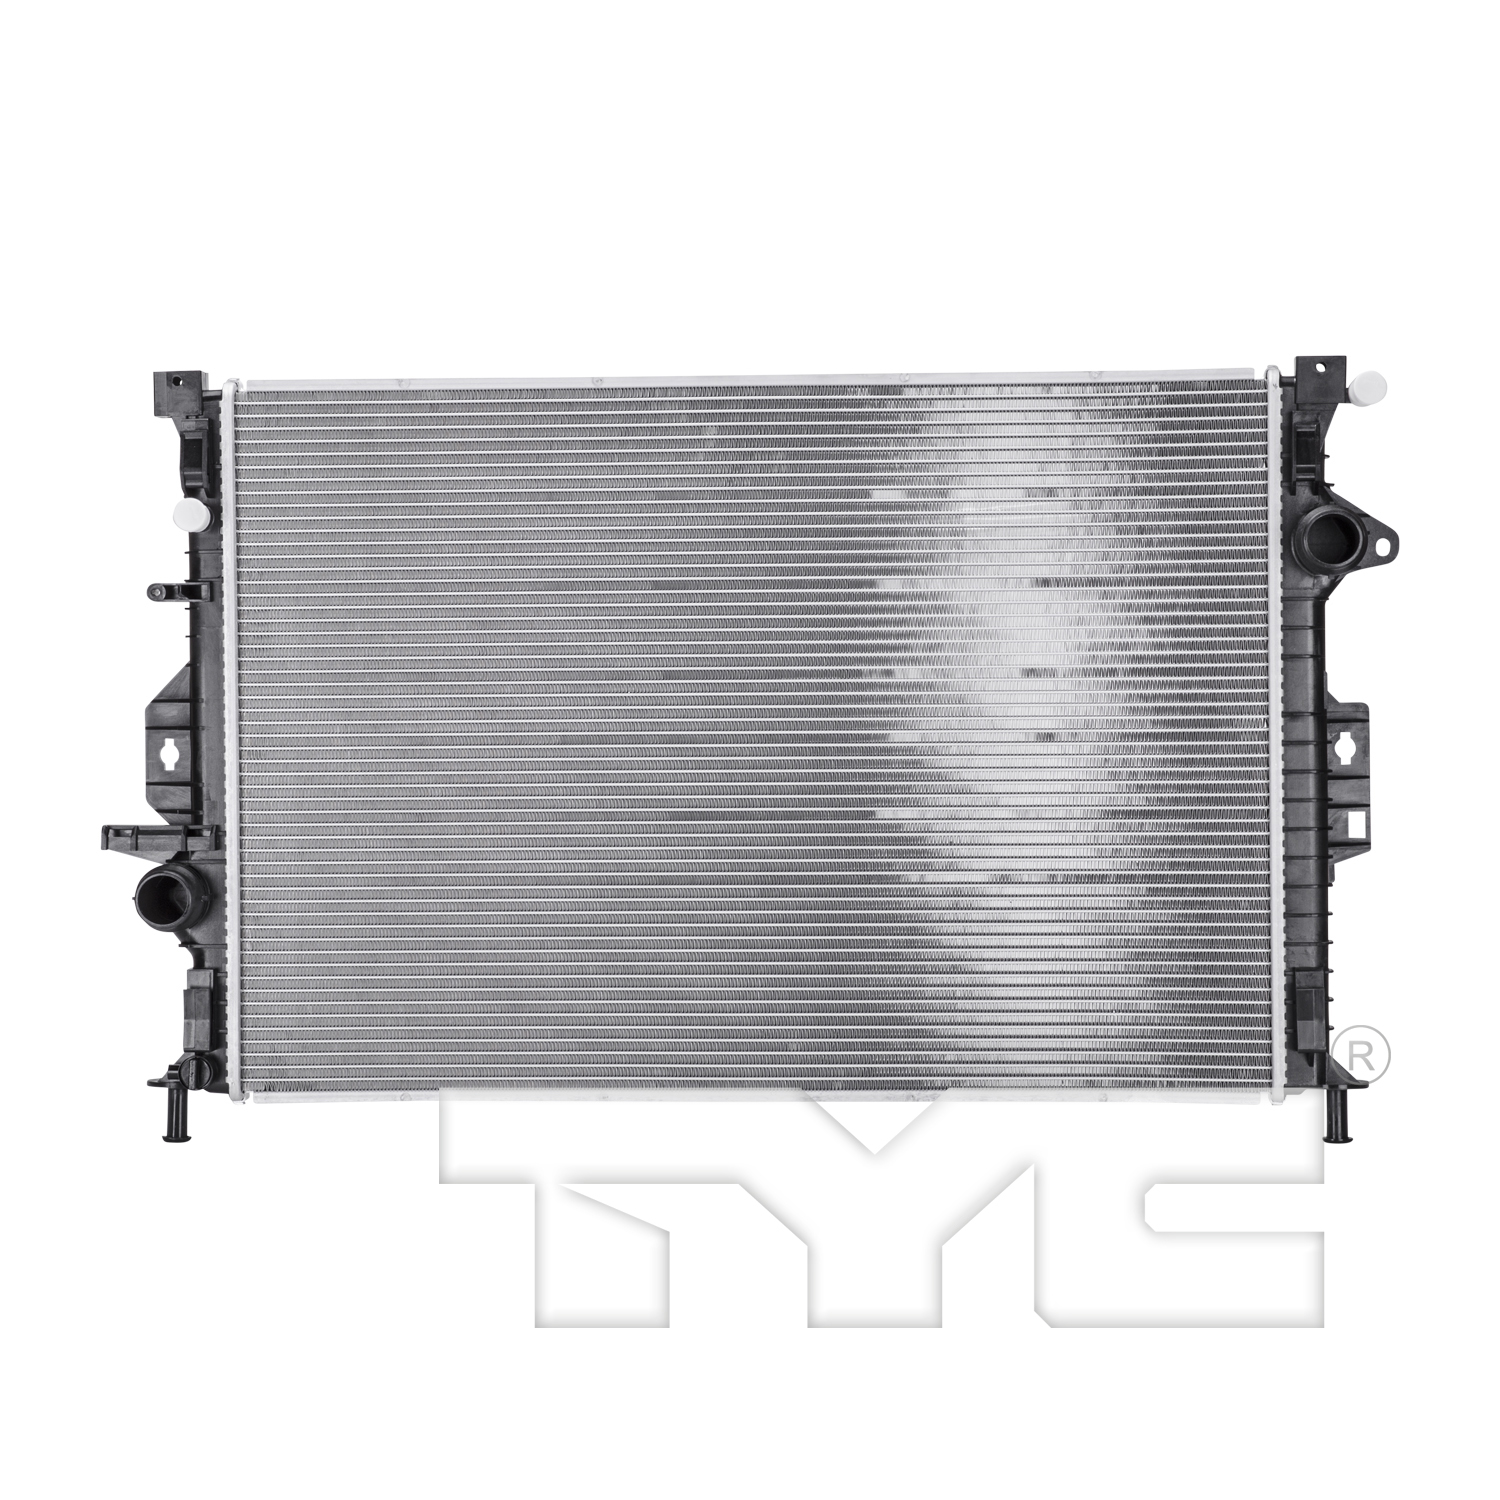 Aftermarket RADIATORS for VOLVO - S60, S60,12-12,Radiator assembly